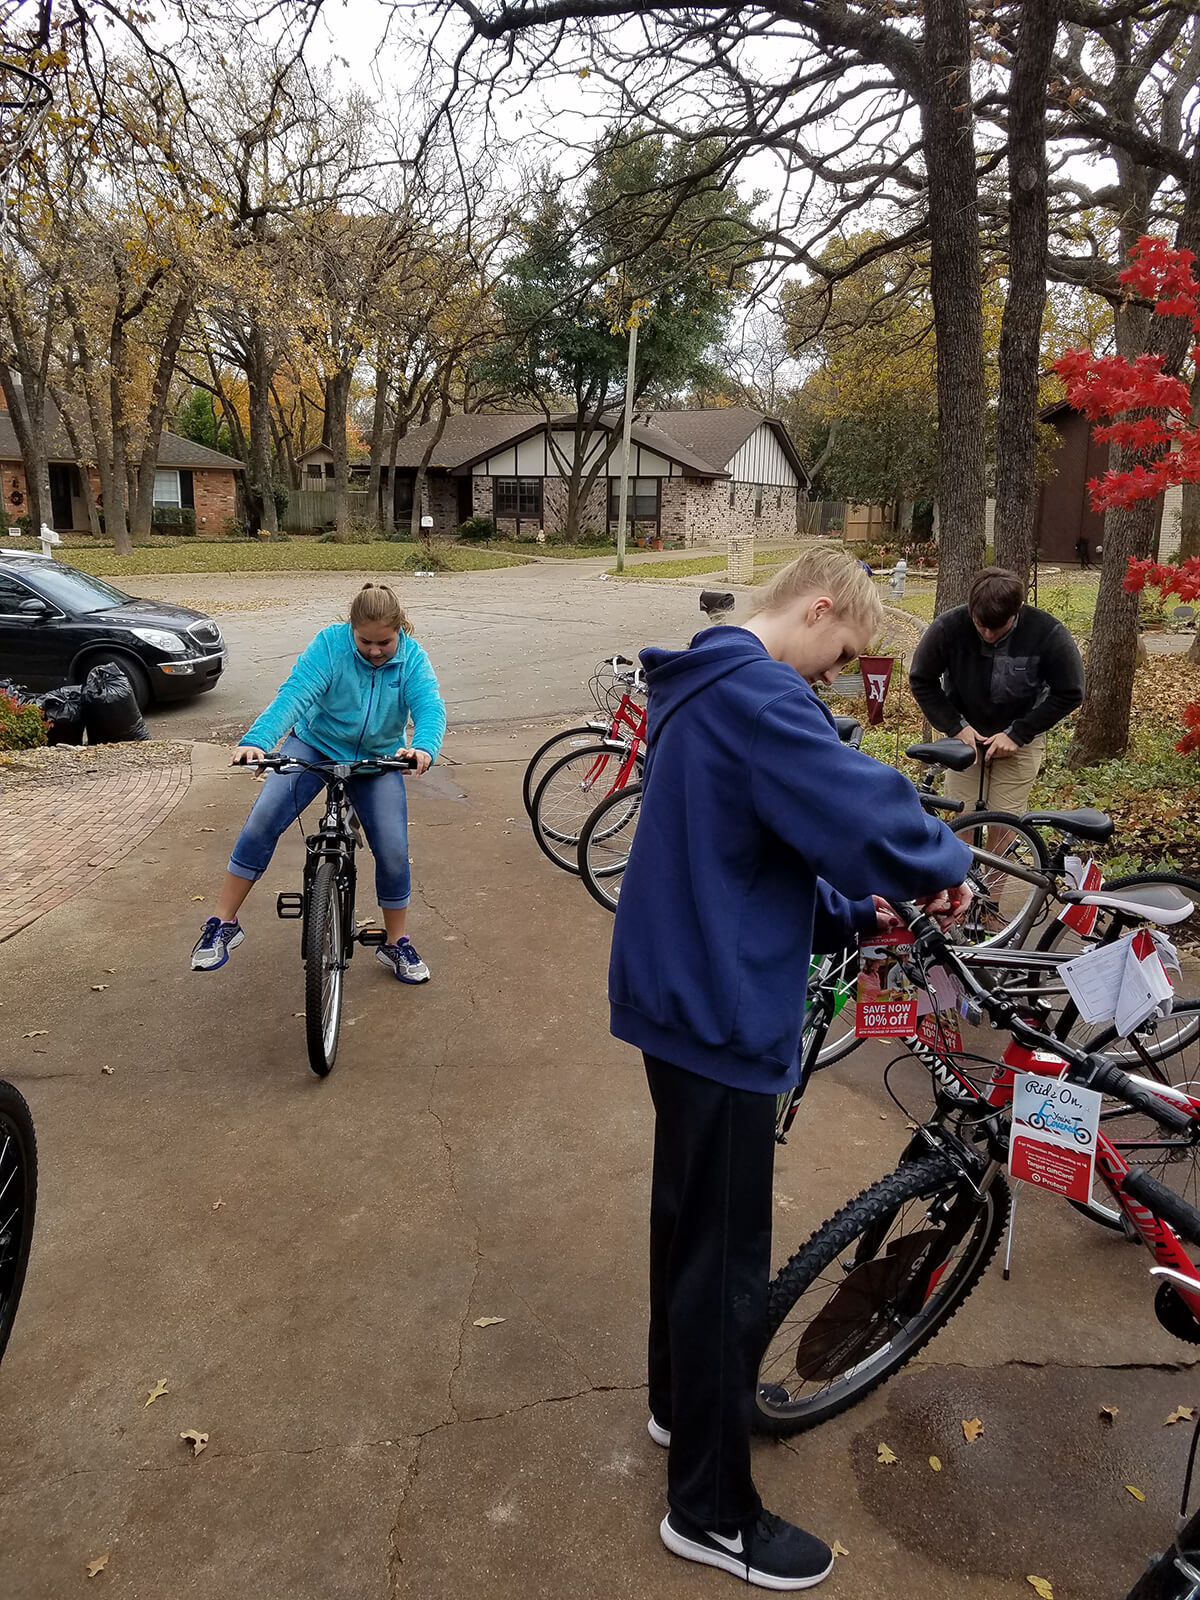 Trey, Audrey and Abby prepping and testing the bikes before delivery